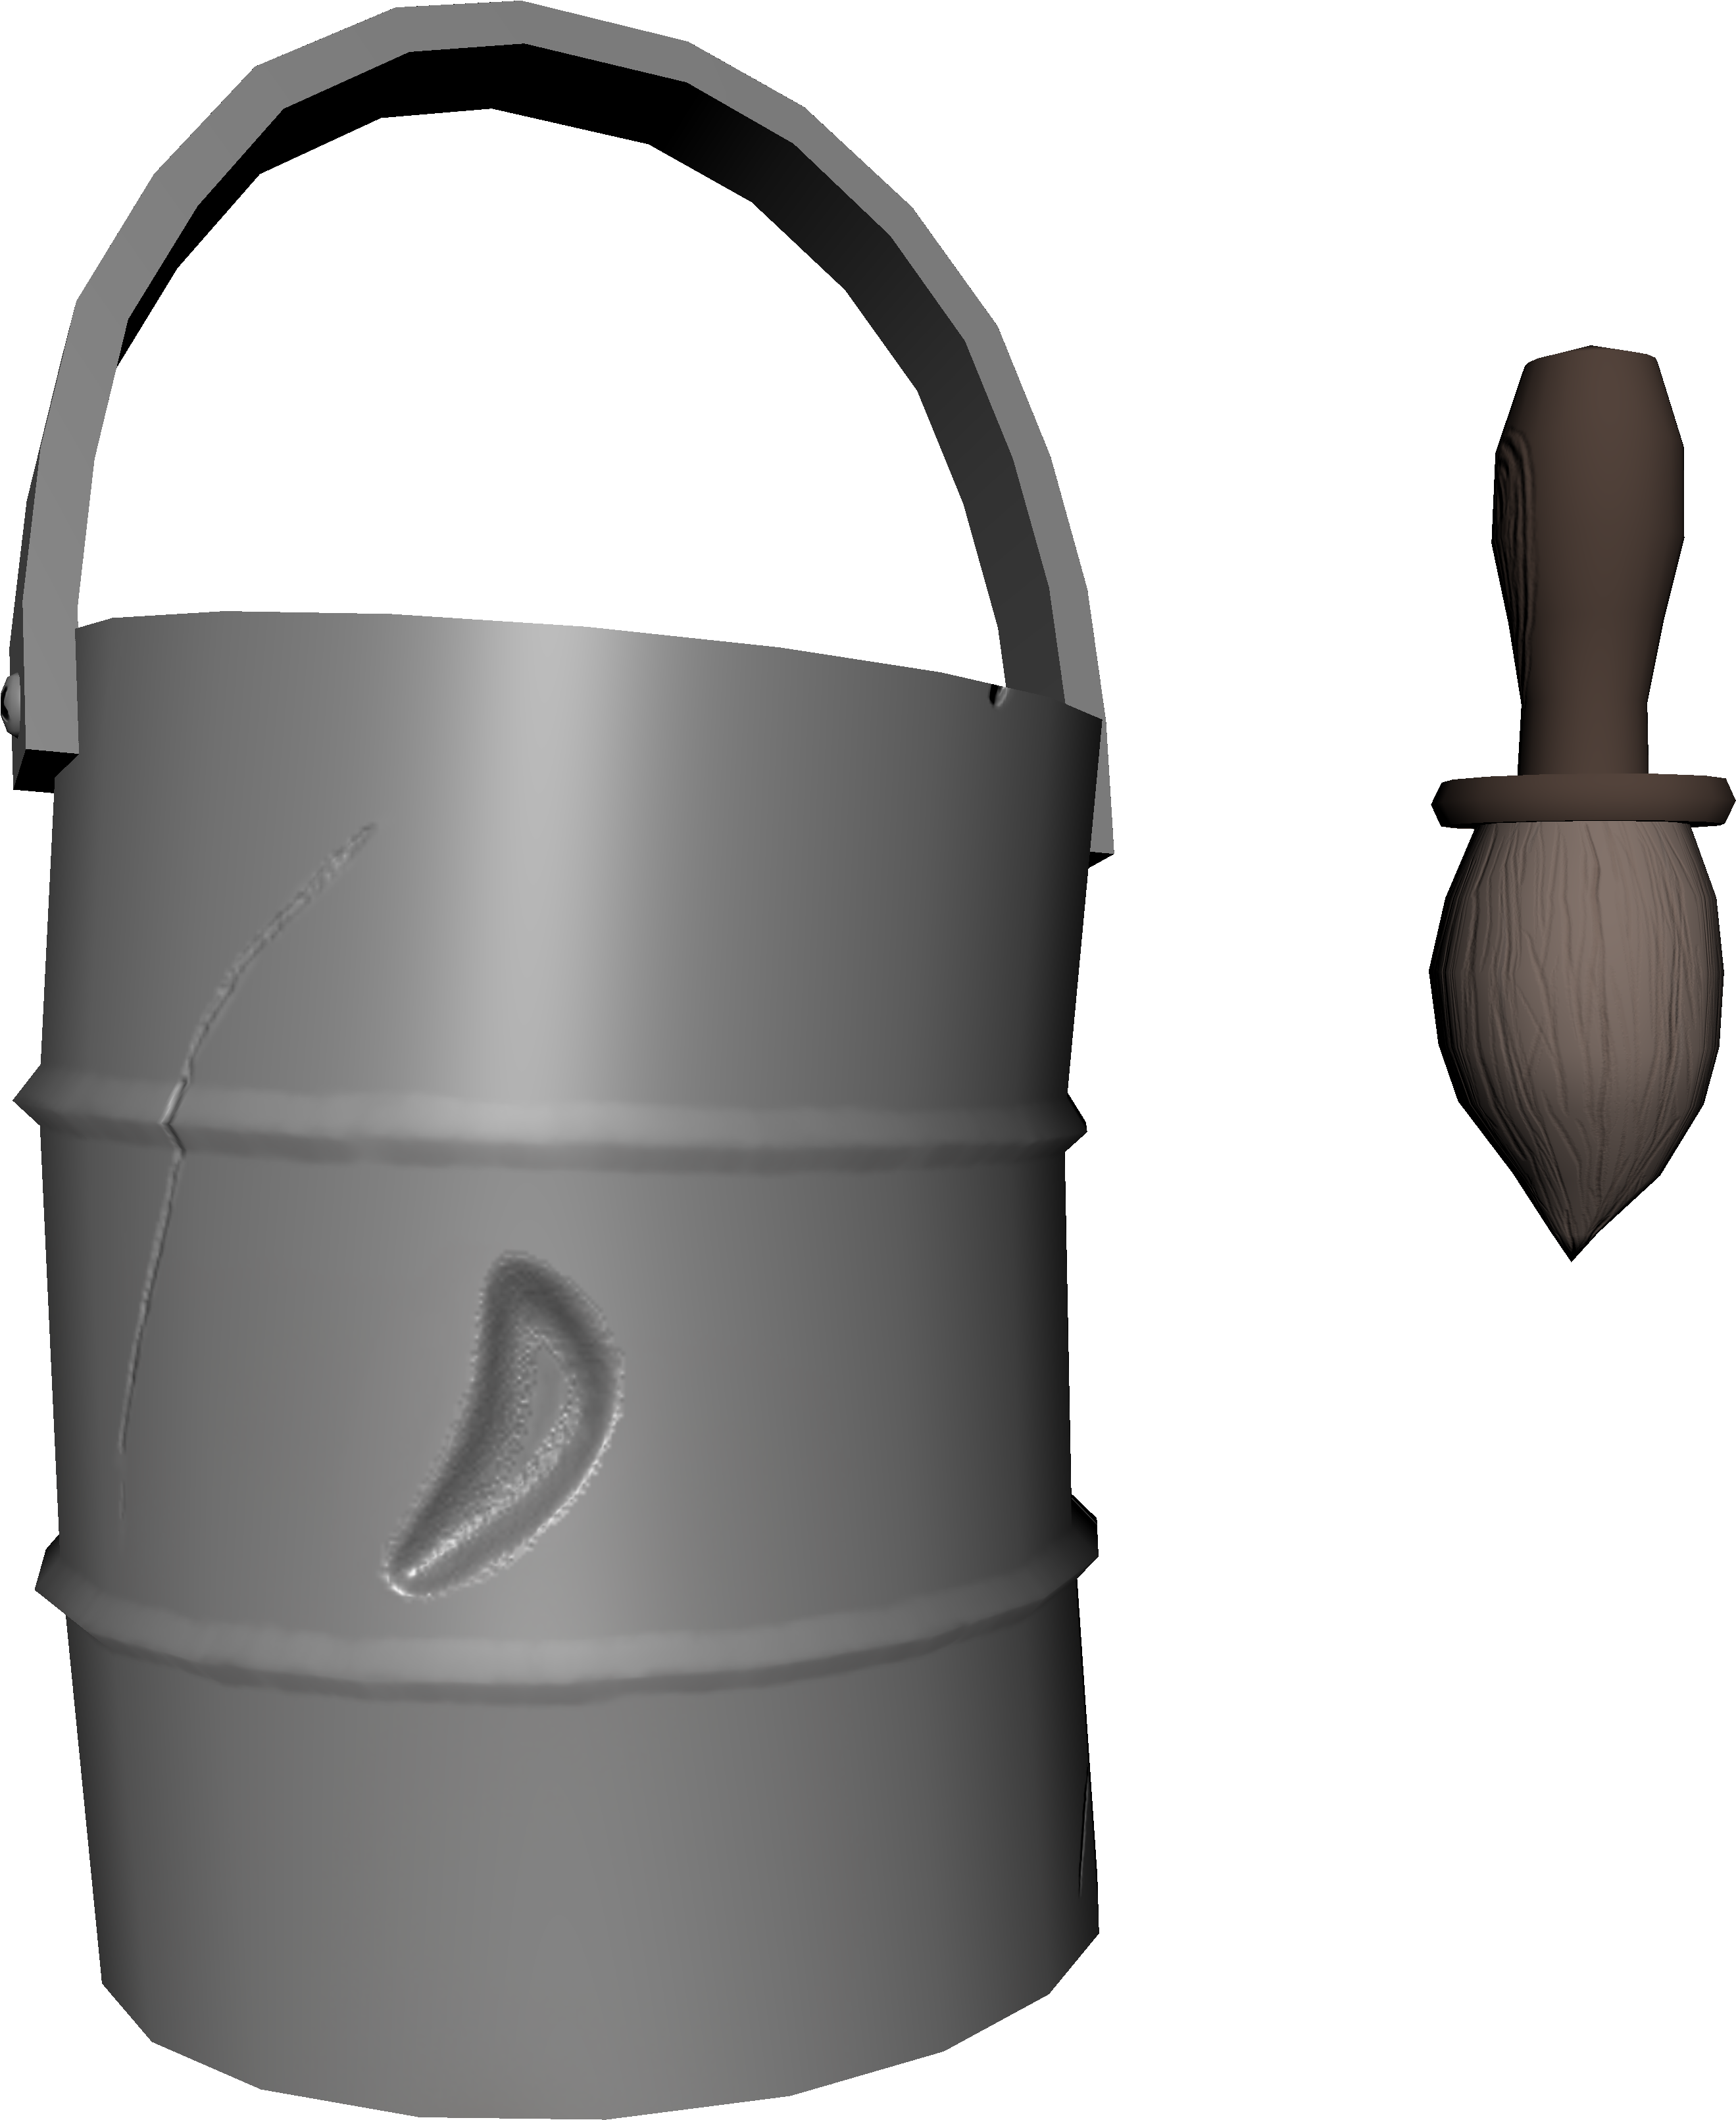 For The Most Part It's Just Modelling, But I Have Textured - Watering Can (4096x4096)